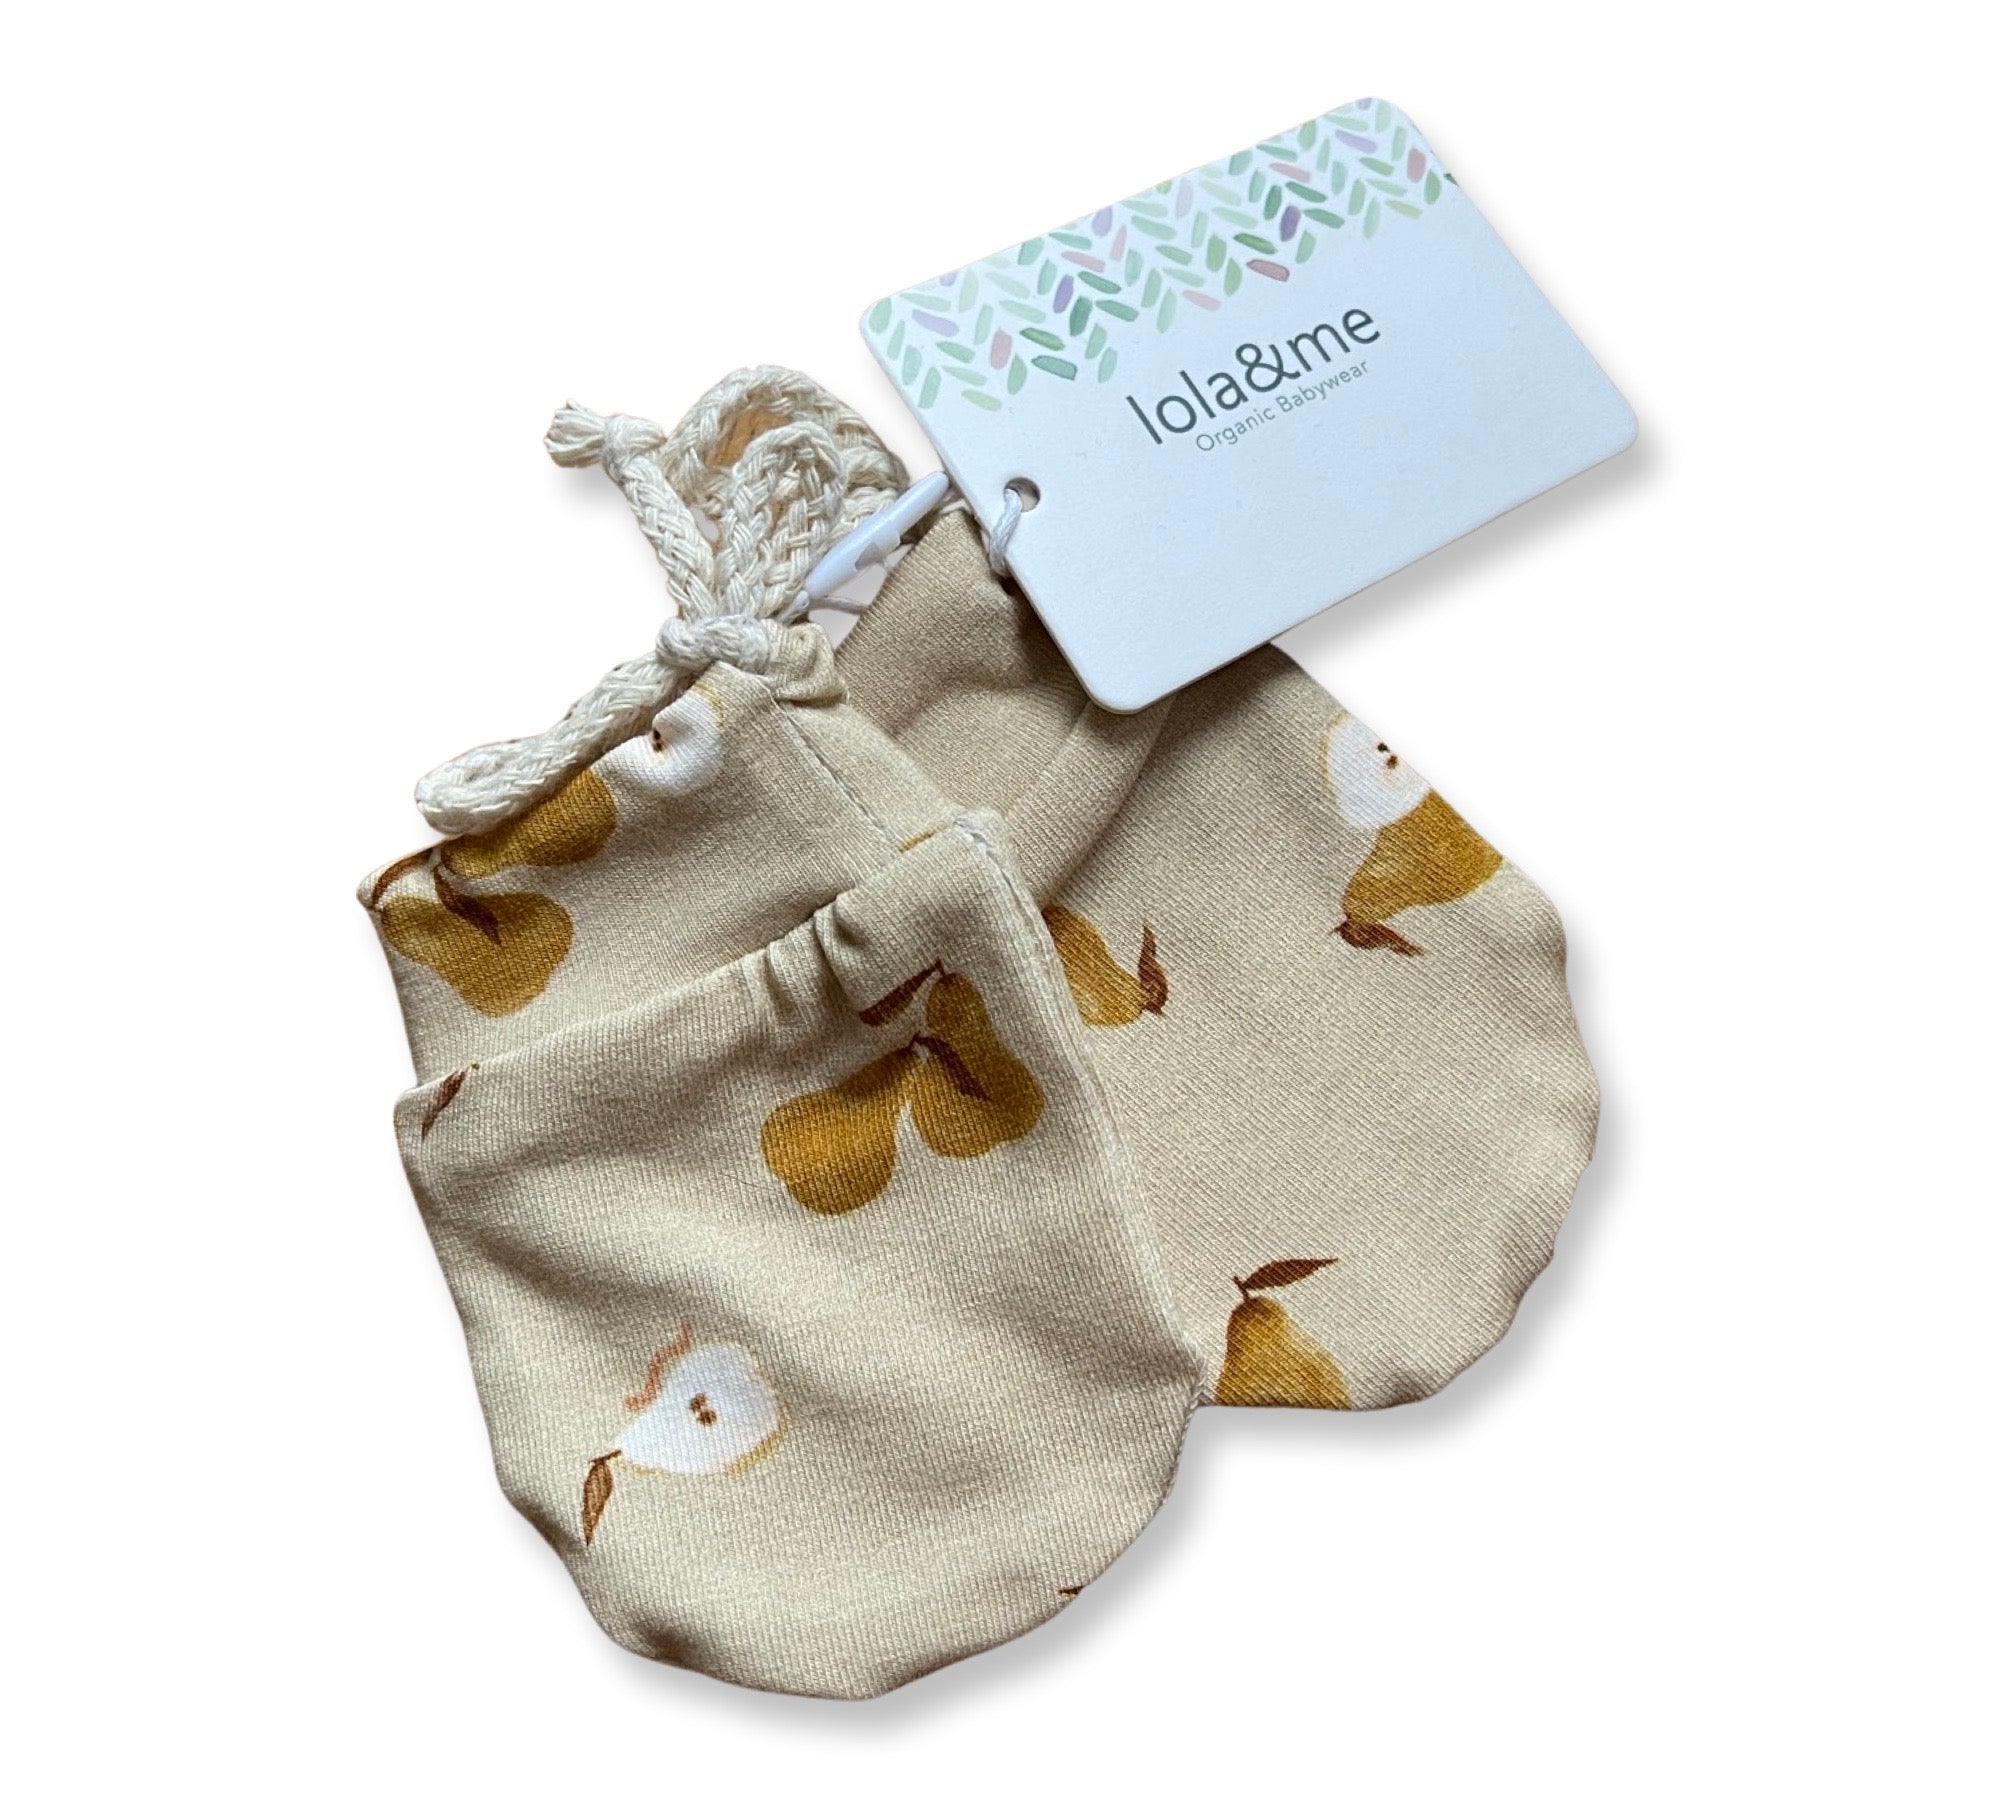 A small fabric pouch with a floral pattern, featuring a drawstring closure and an attached brand label that reads "giftbox co.," perfect as a New Arrival baby giftbox.